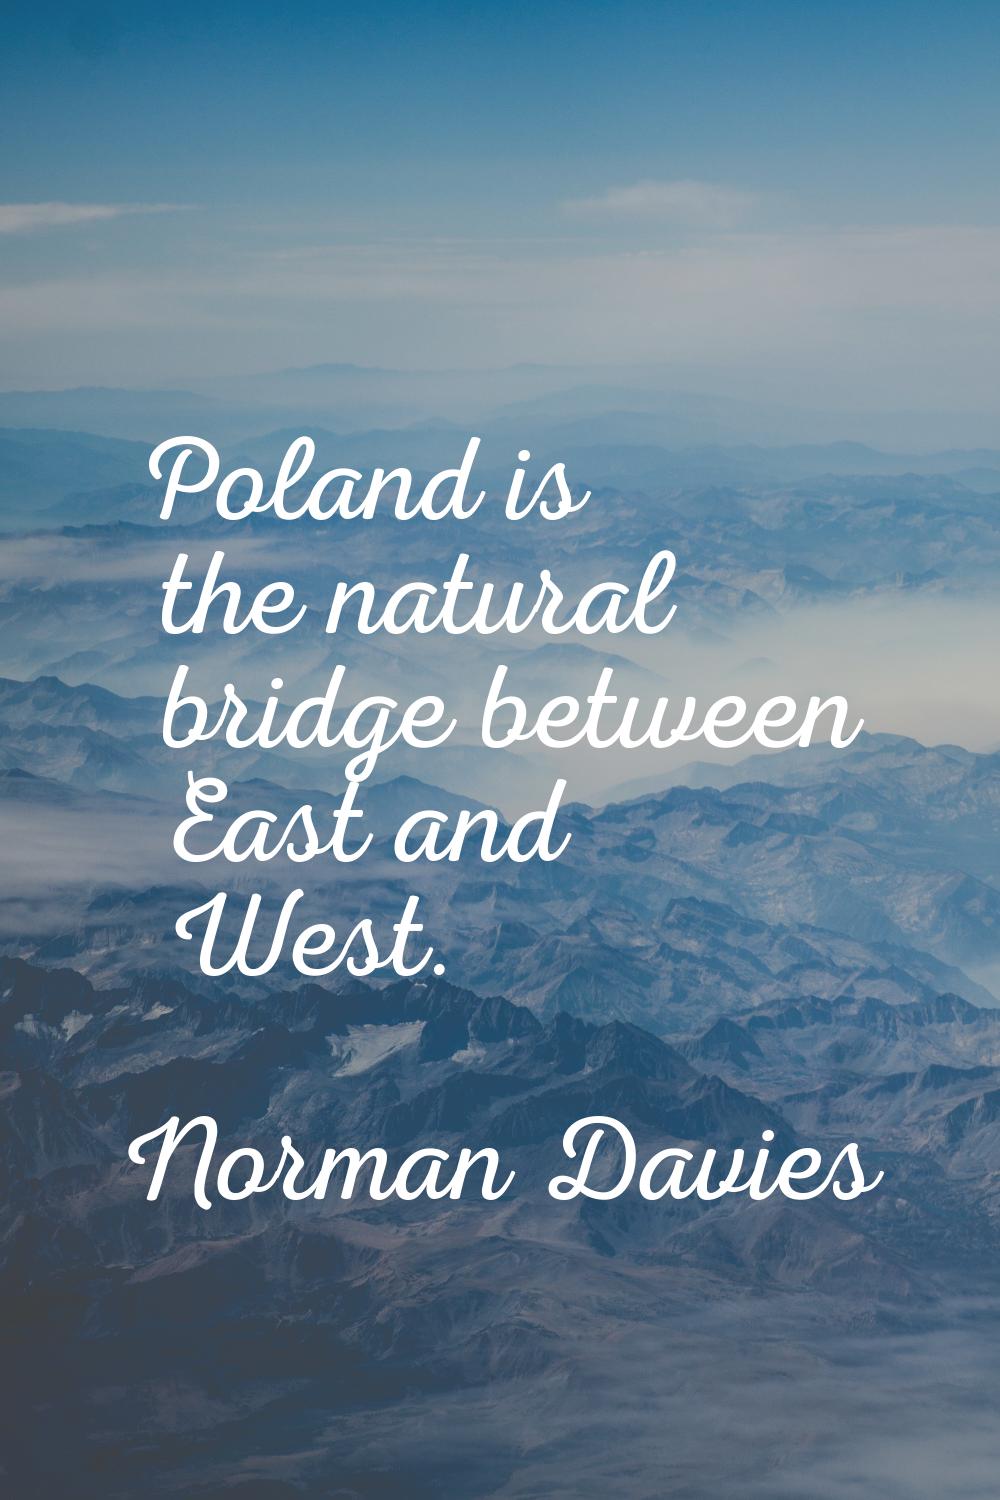 Poland is the natural bridge between East and West.